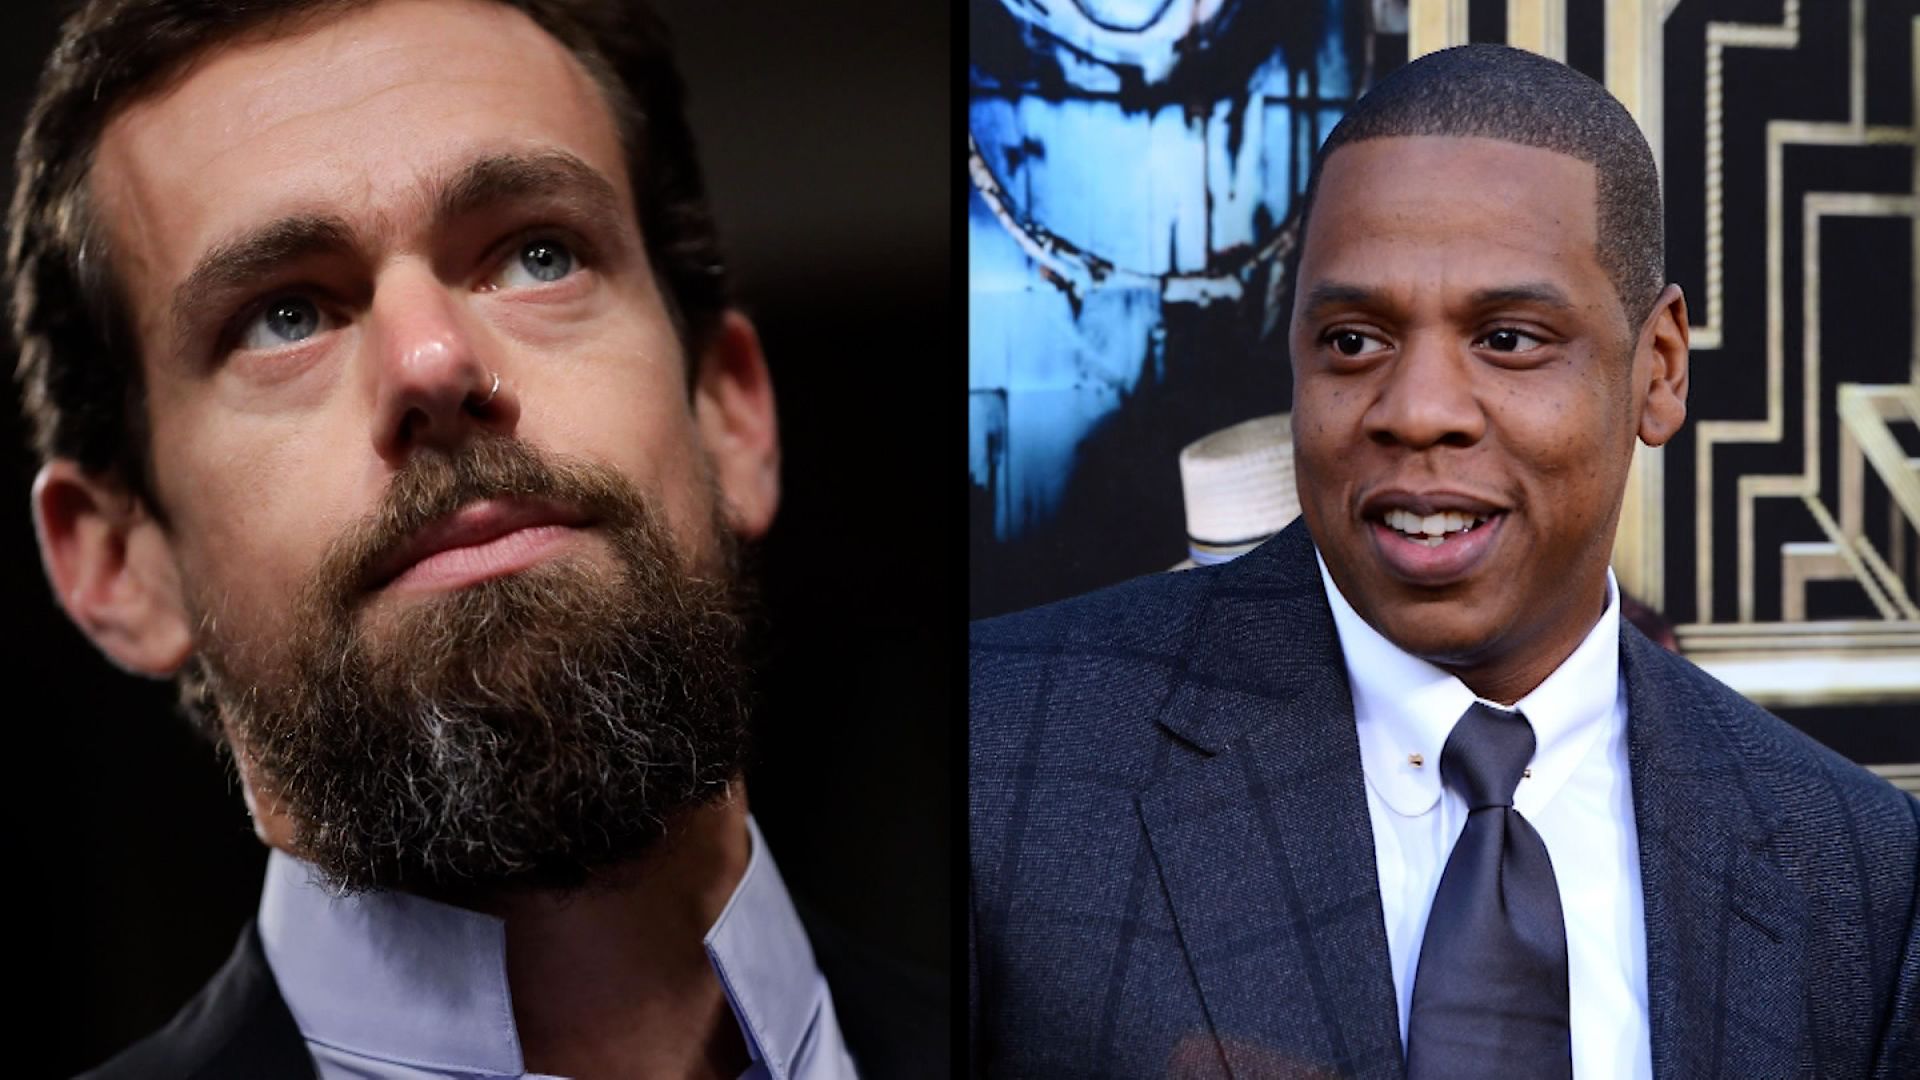 Jack Dorsey spent $300 million to hang out with Jay-Z #block